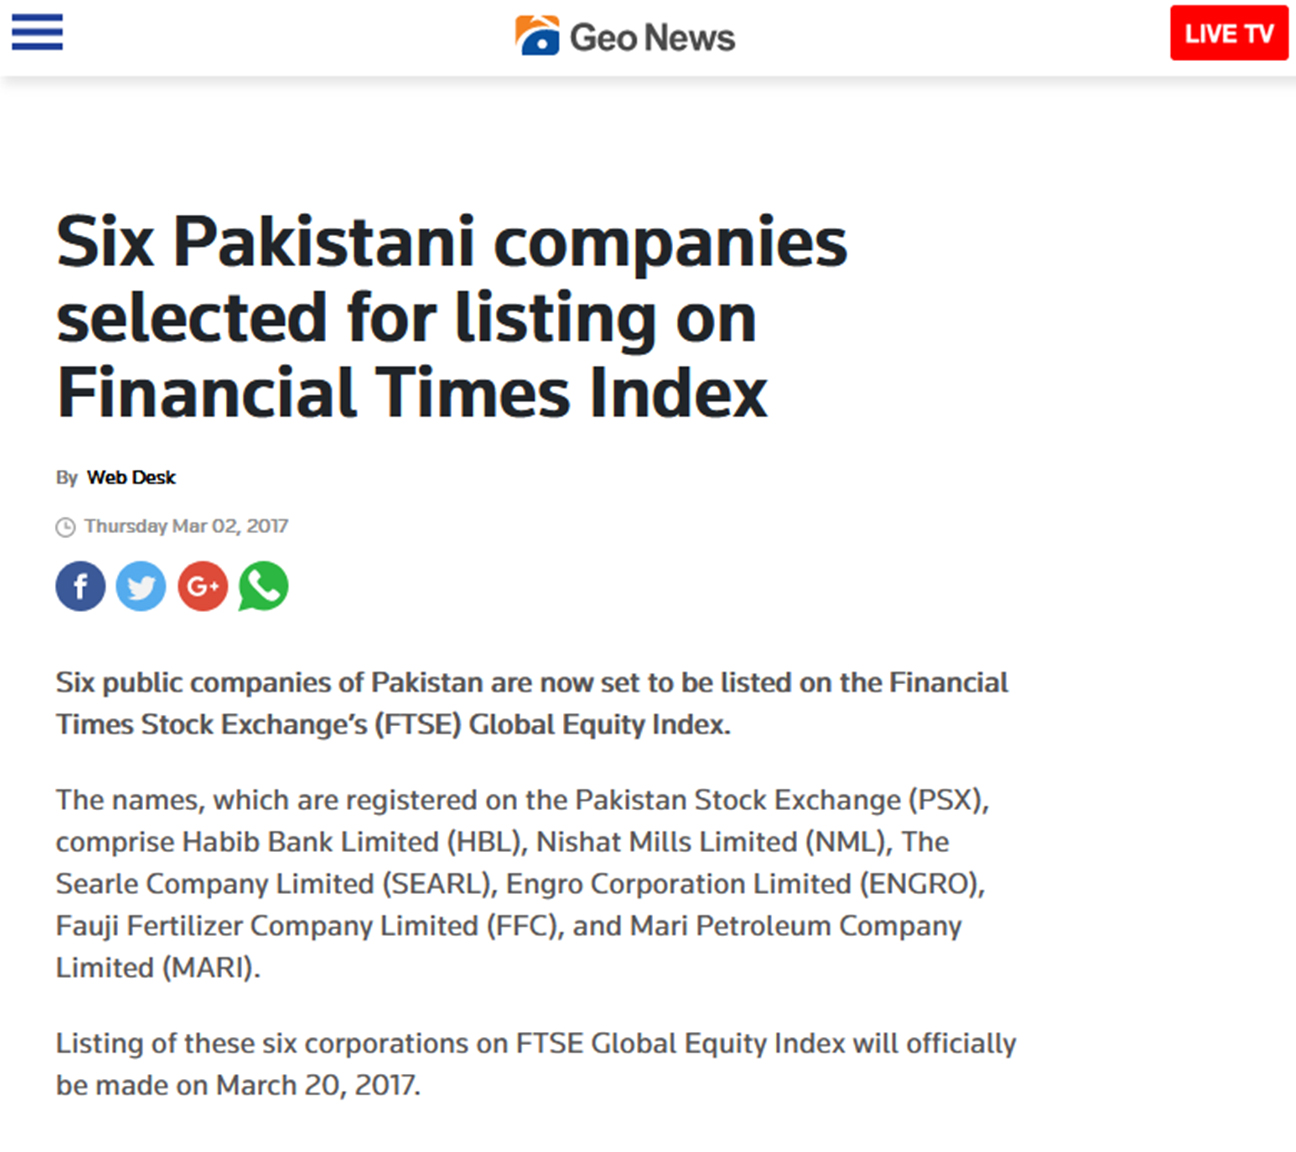 SIX PAKISTANI COMPANIES SELECTED FOR LISTING ON  FINANCIAL TIMES INDEX